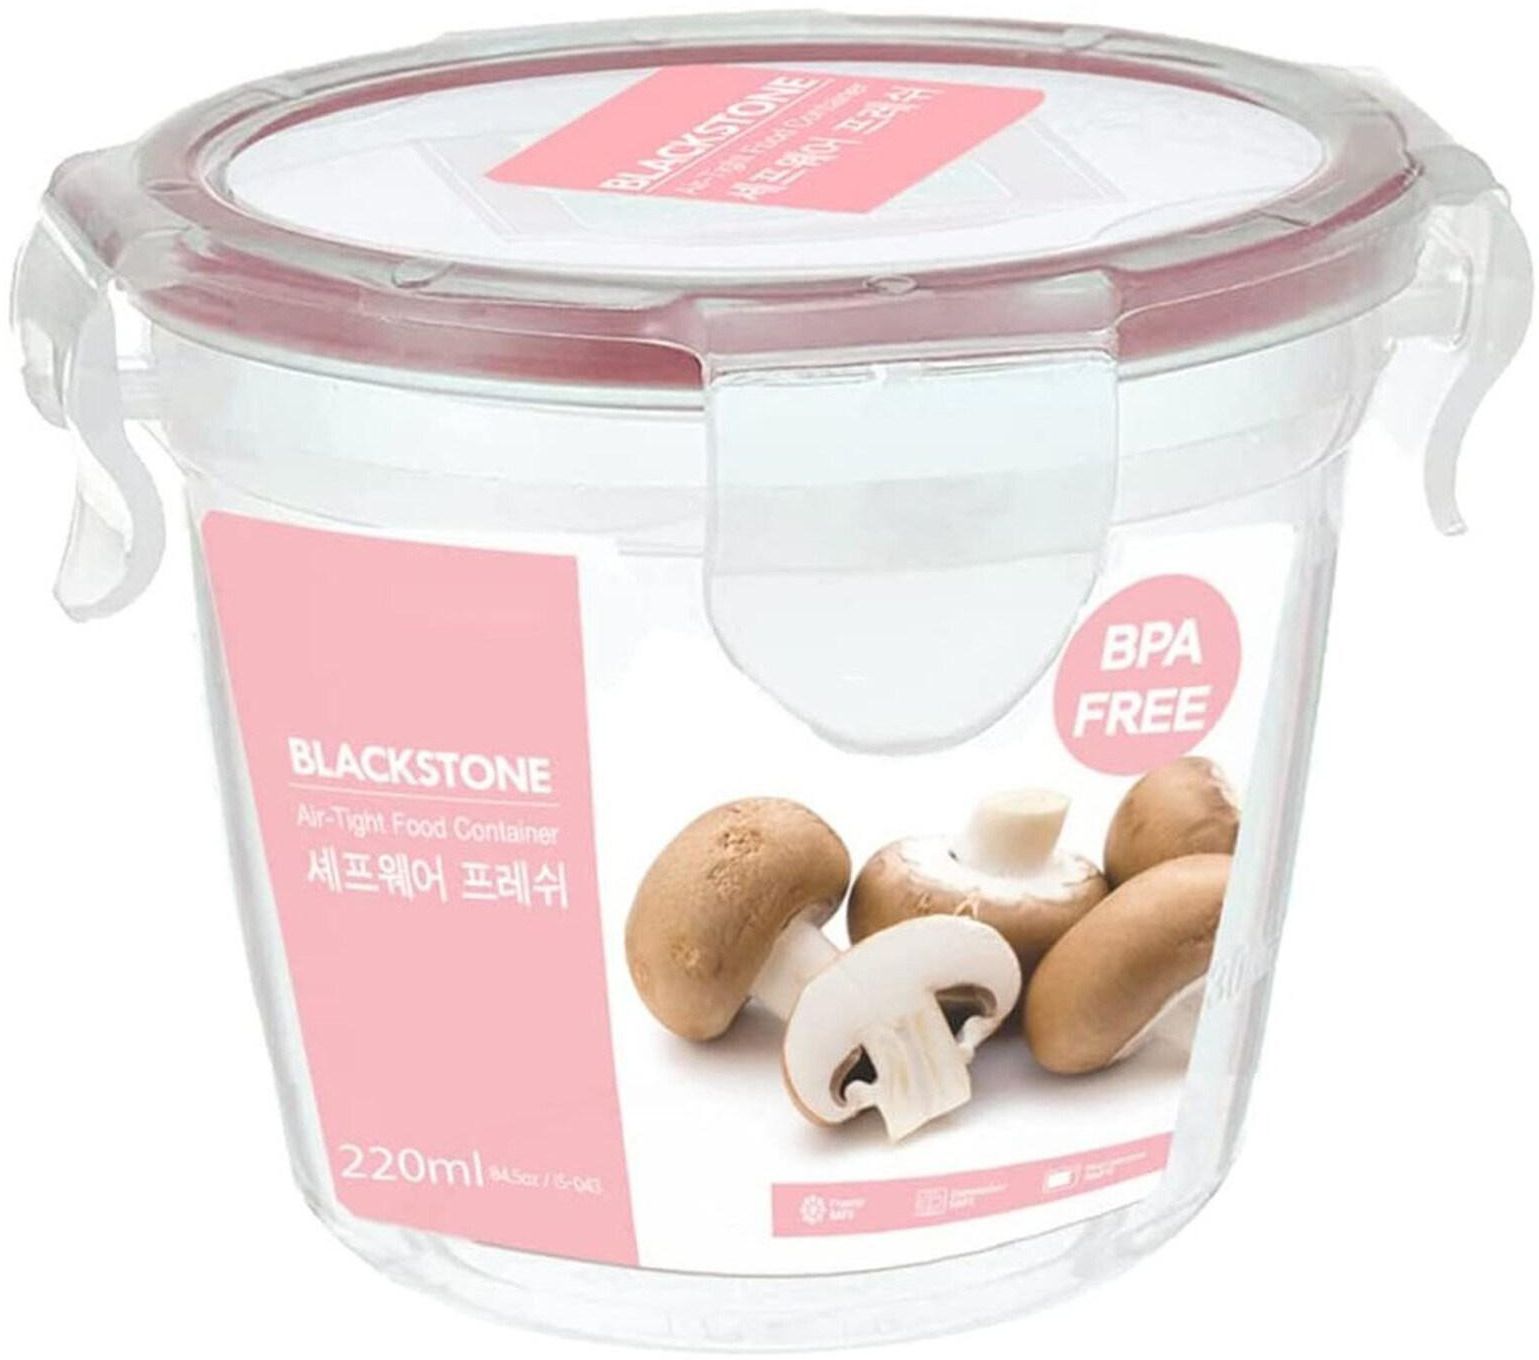 Blackstone Round Air-Tight Food Container IS211 Clear/Pink 220ml